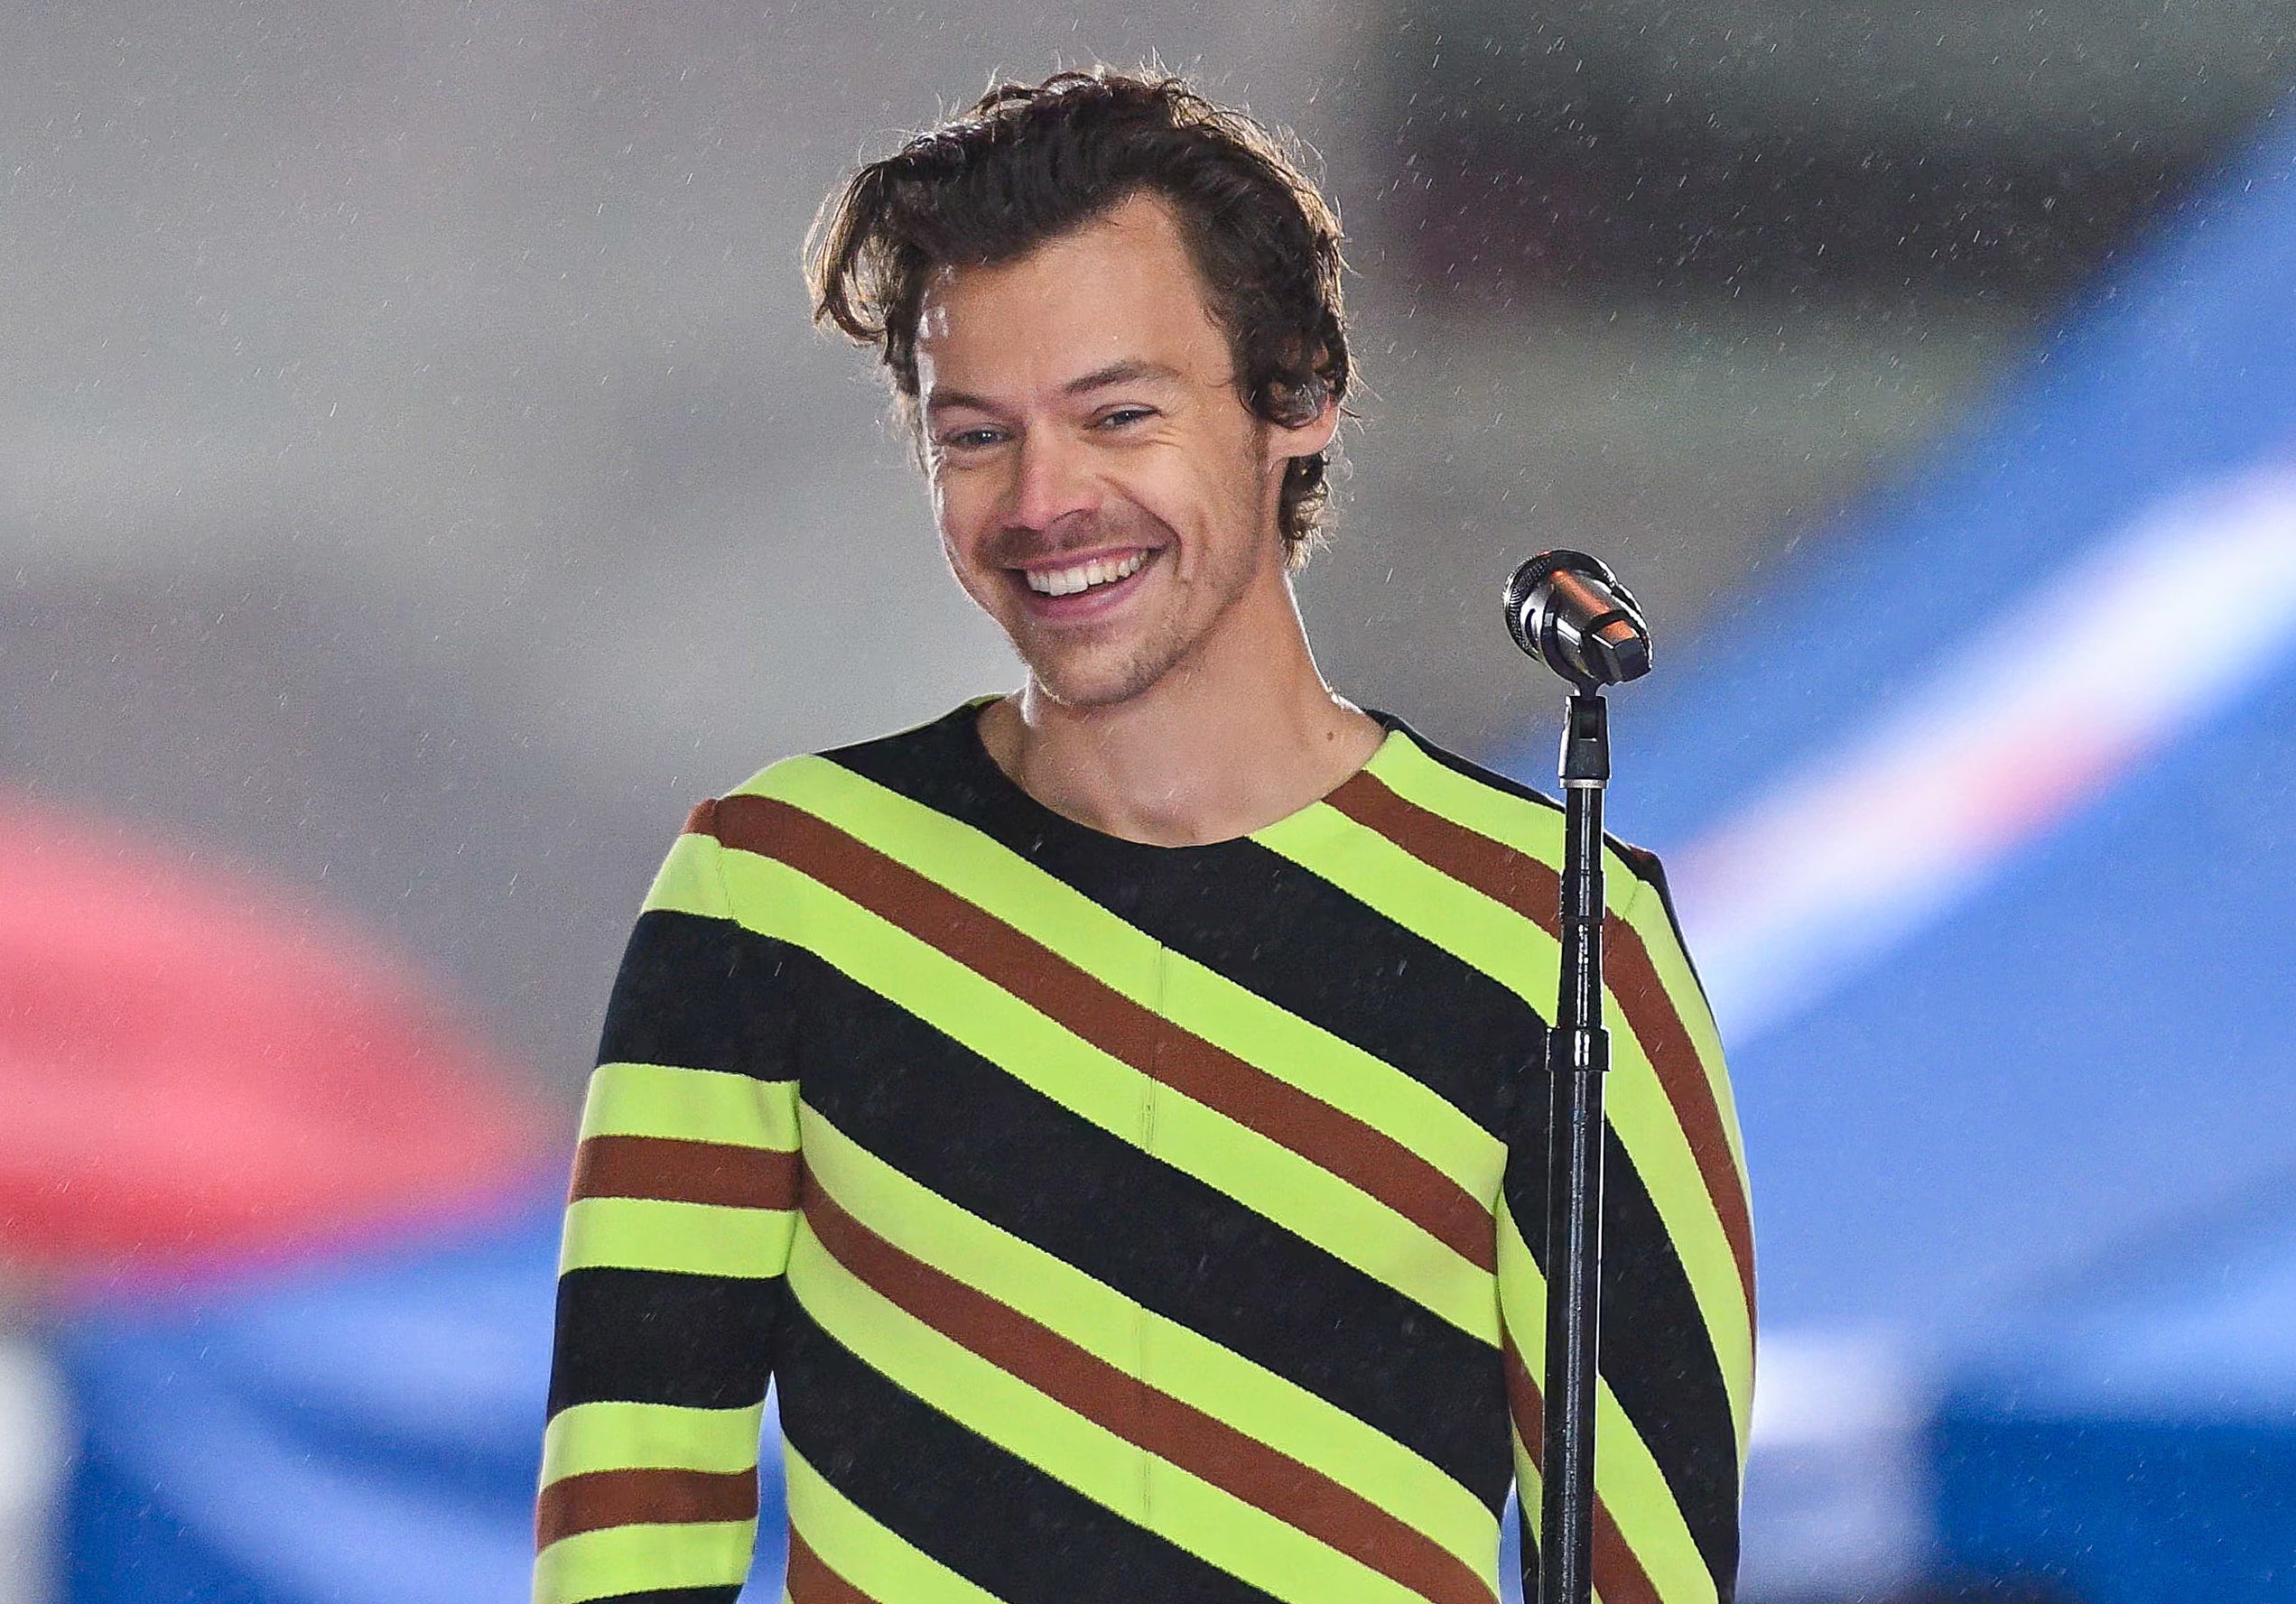 A closeup of Harry on stage smiling